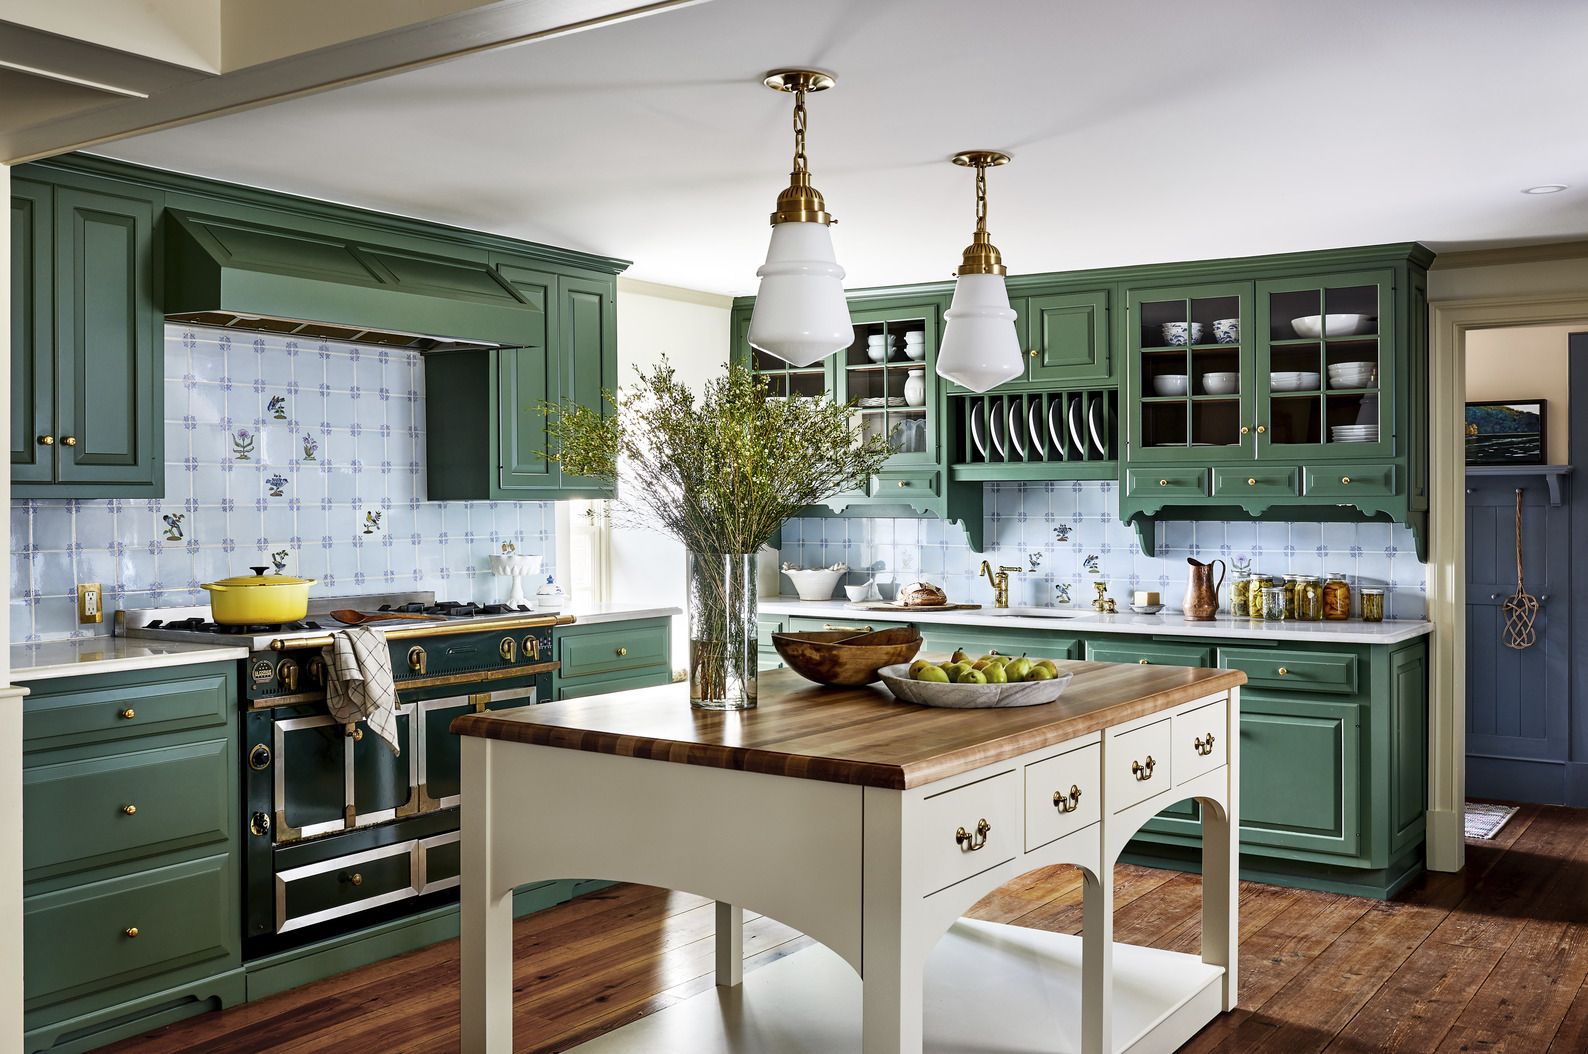 14 Green Kitchen Cabinet Ideas 2023 - Top Green Paint Colors For Kitchens